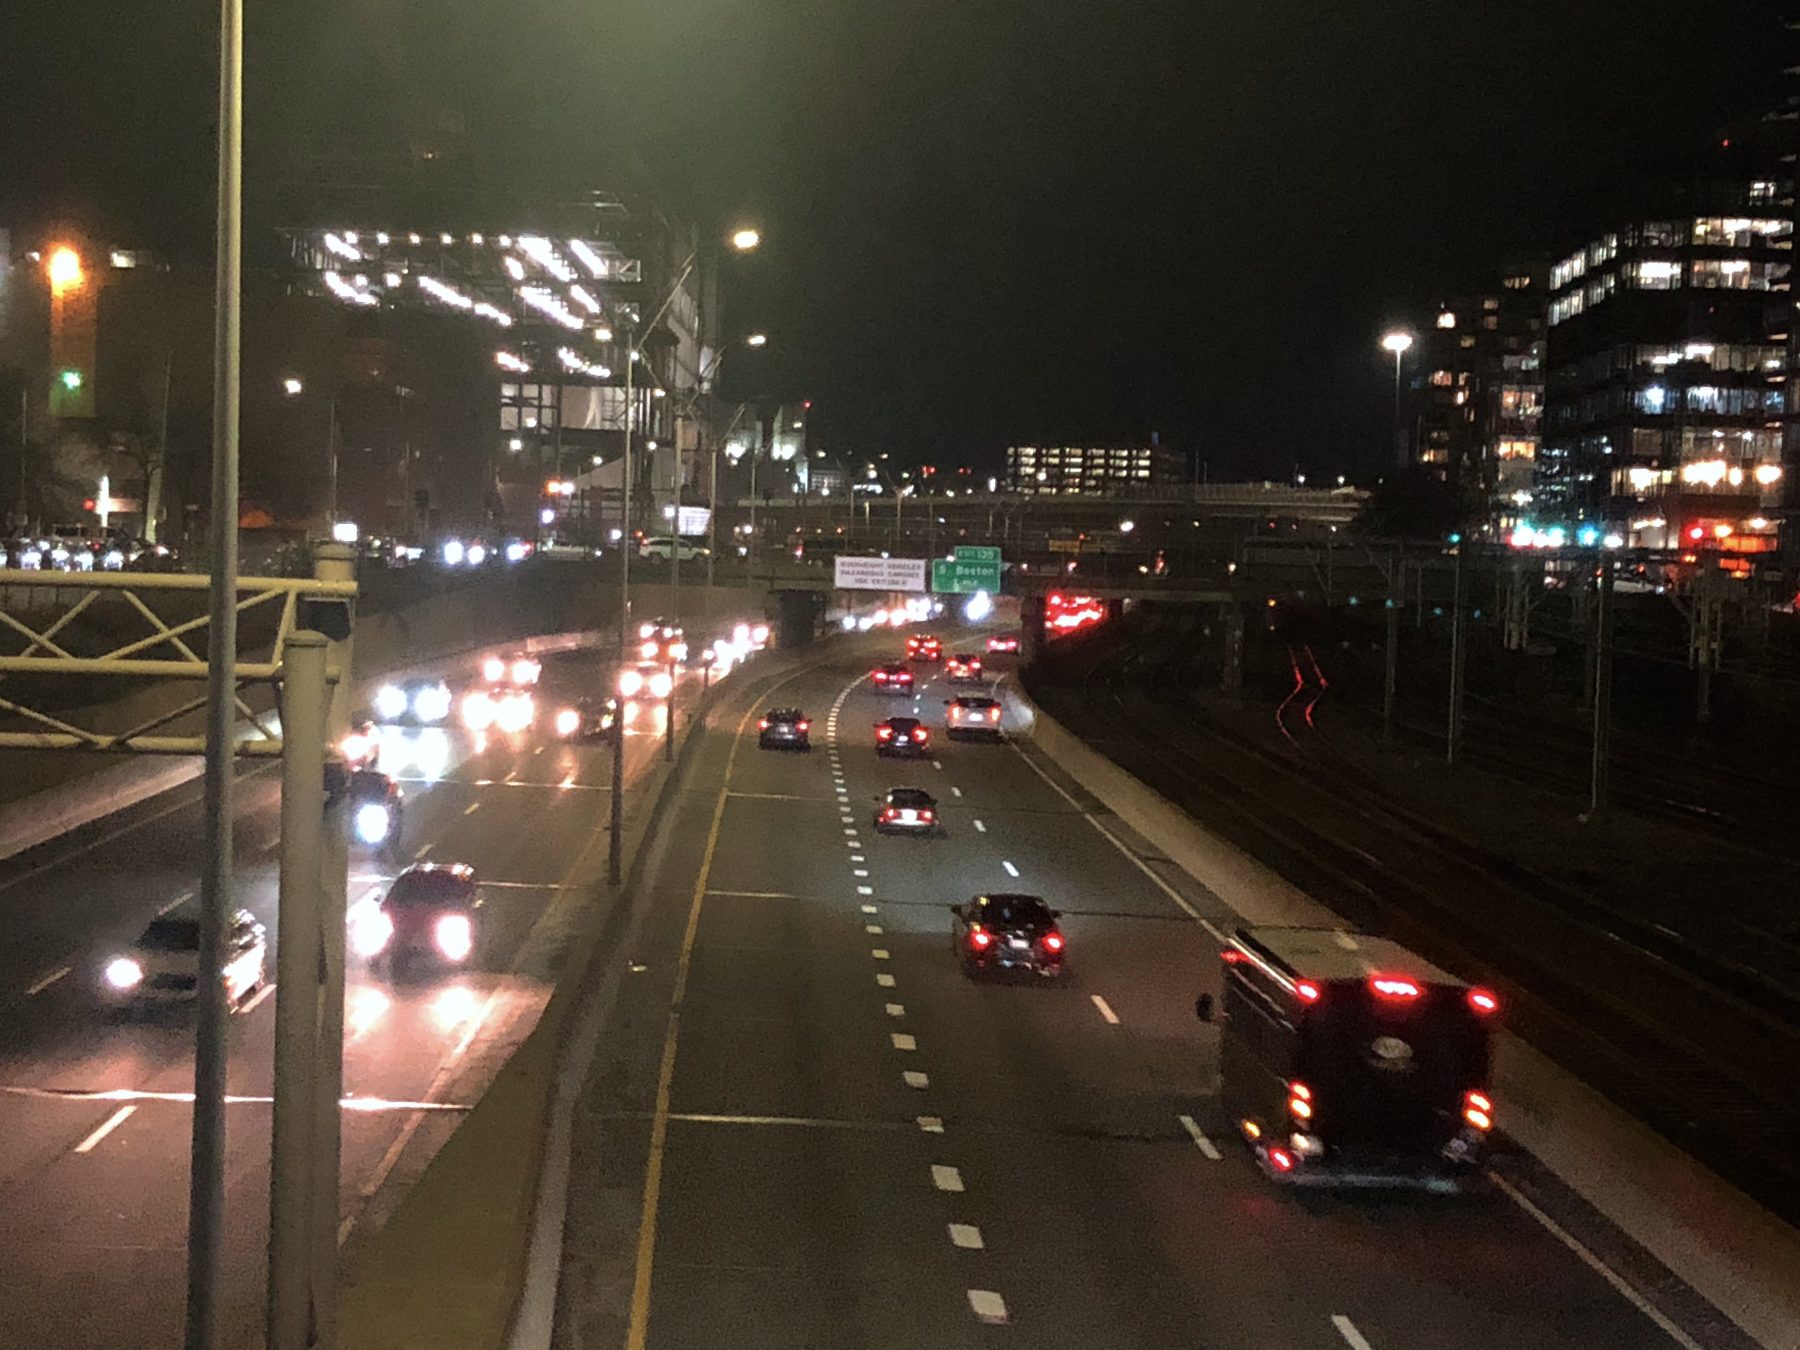 A nighttime view of cars and trucks on a 6-lane expressway next to some railroad tracks (right) in downtown Boston.